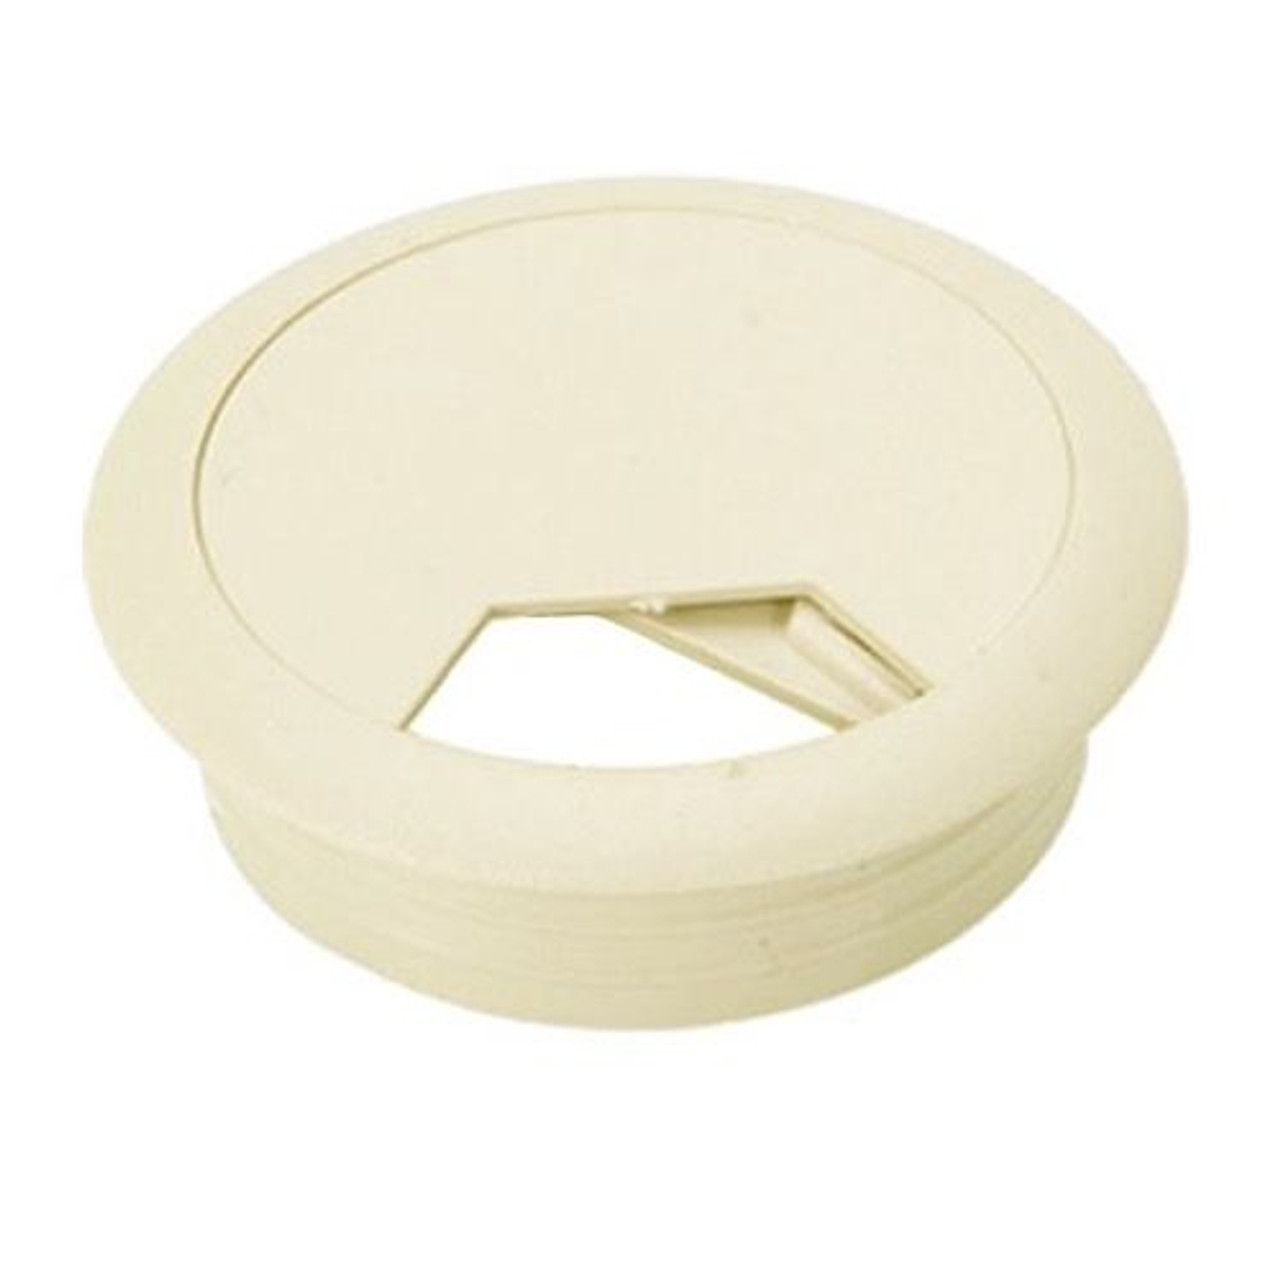 Furniture Cord Cable Hole Cover Off White Grommet Desk 3 1/8" Beige Furniture Hole Grommet Home Office Snap-In Flush Computer Desk Component Equipment Cable Manager Flip Top Wire Cover, Part # Gizzmo 2699